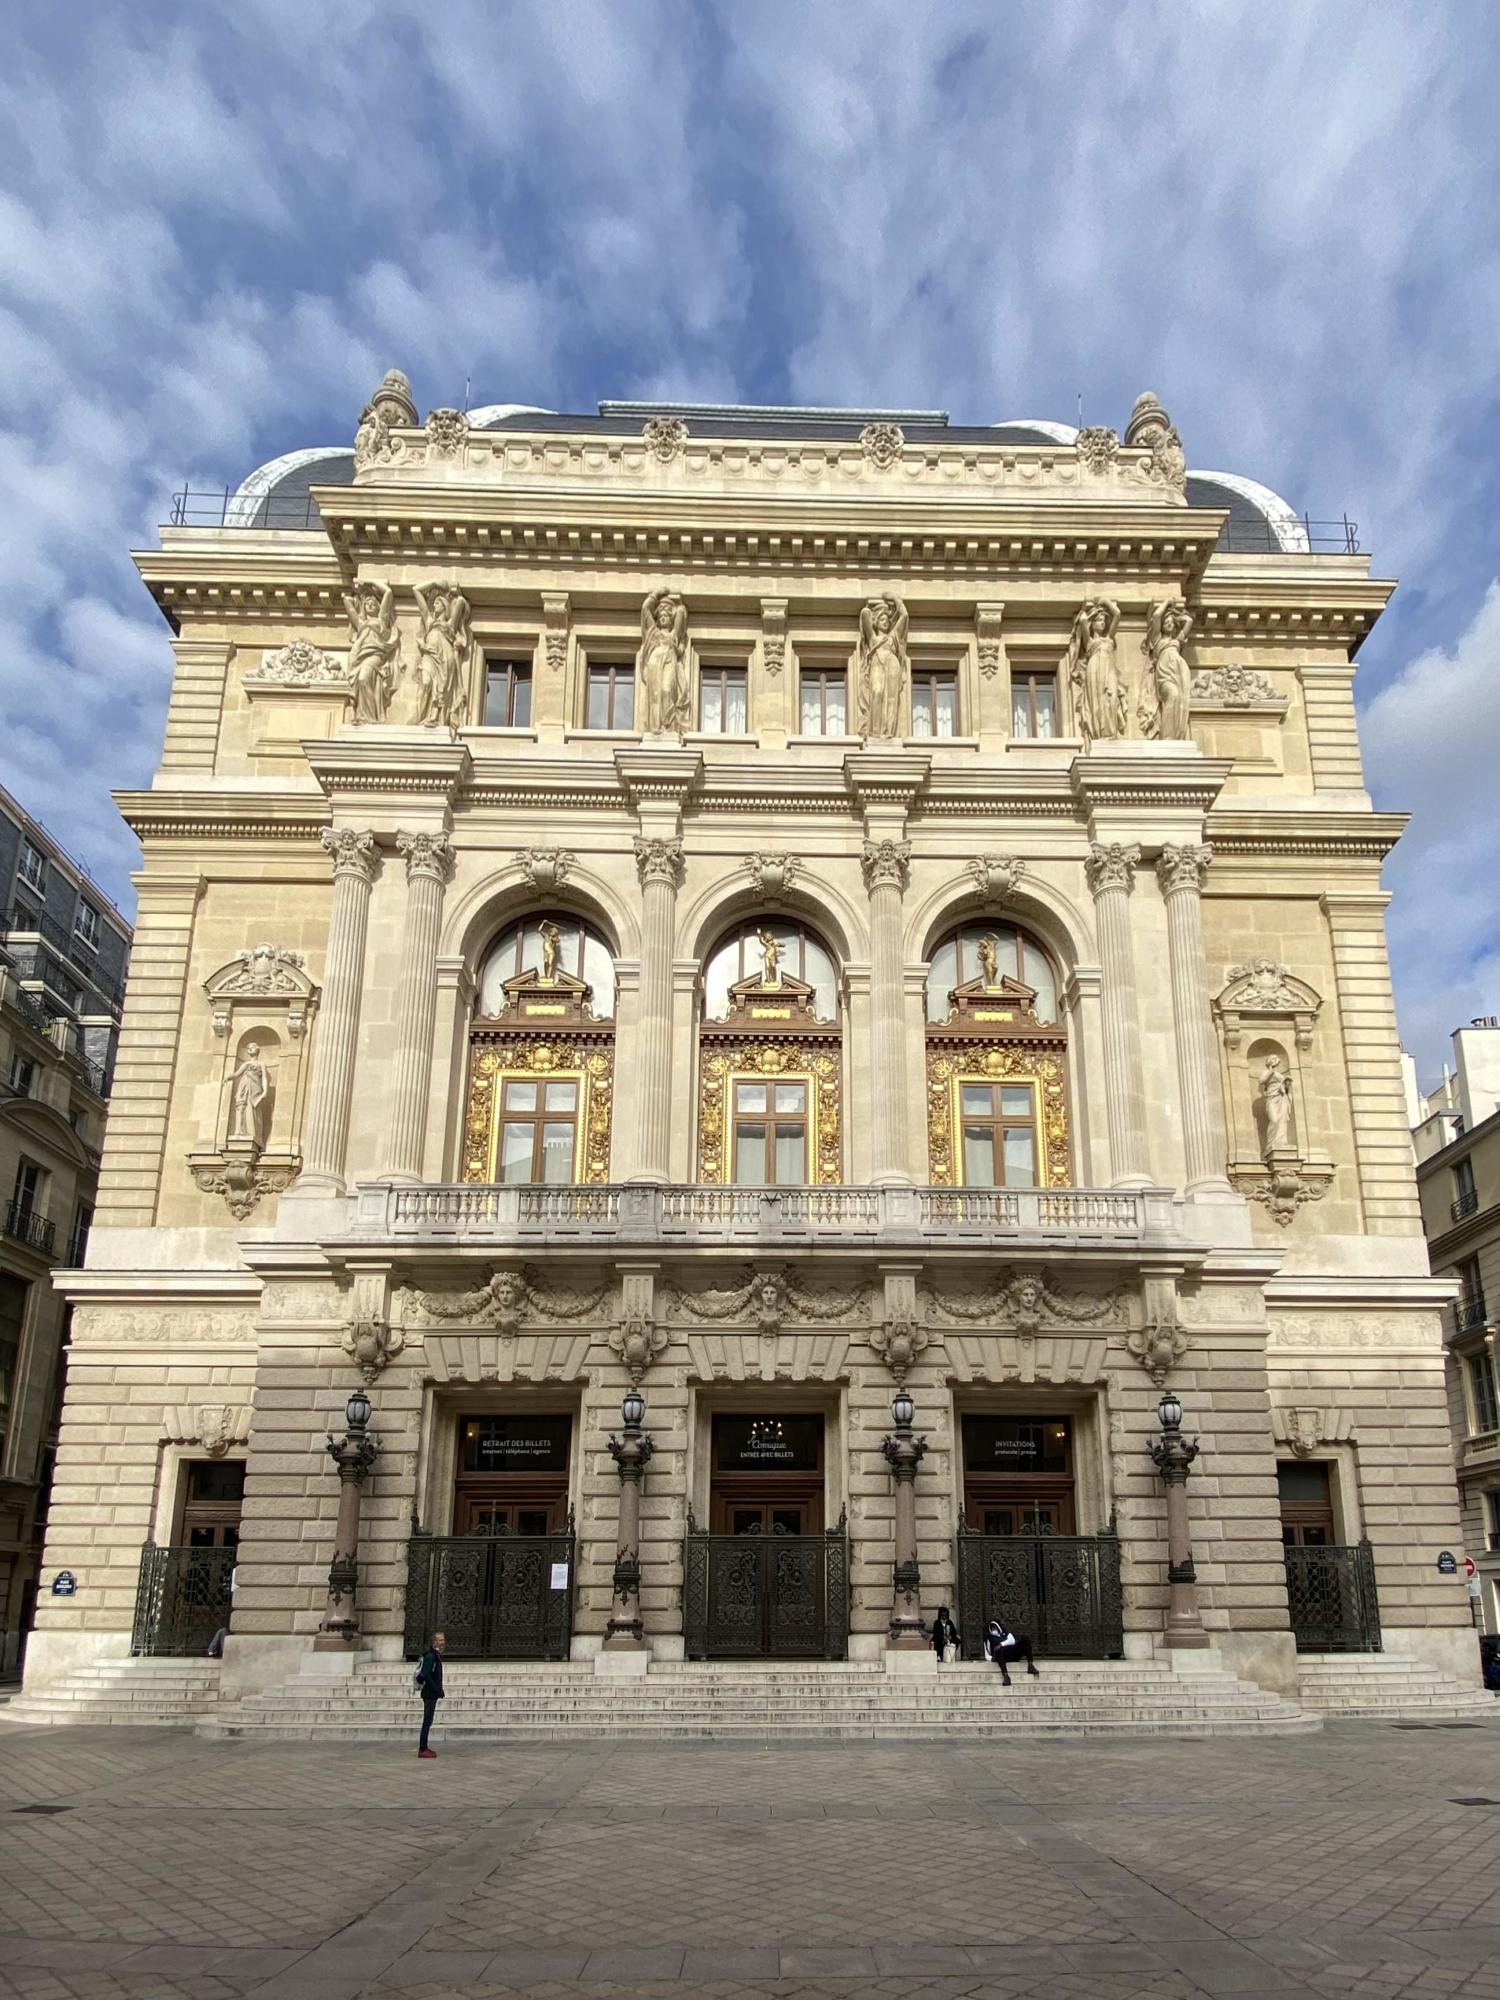 The Opera Comique is on the Boieldieu place, behind Hotel Gramont Paris